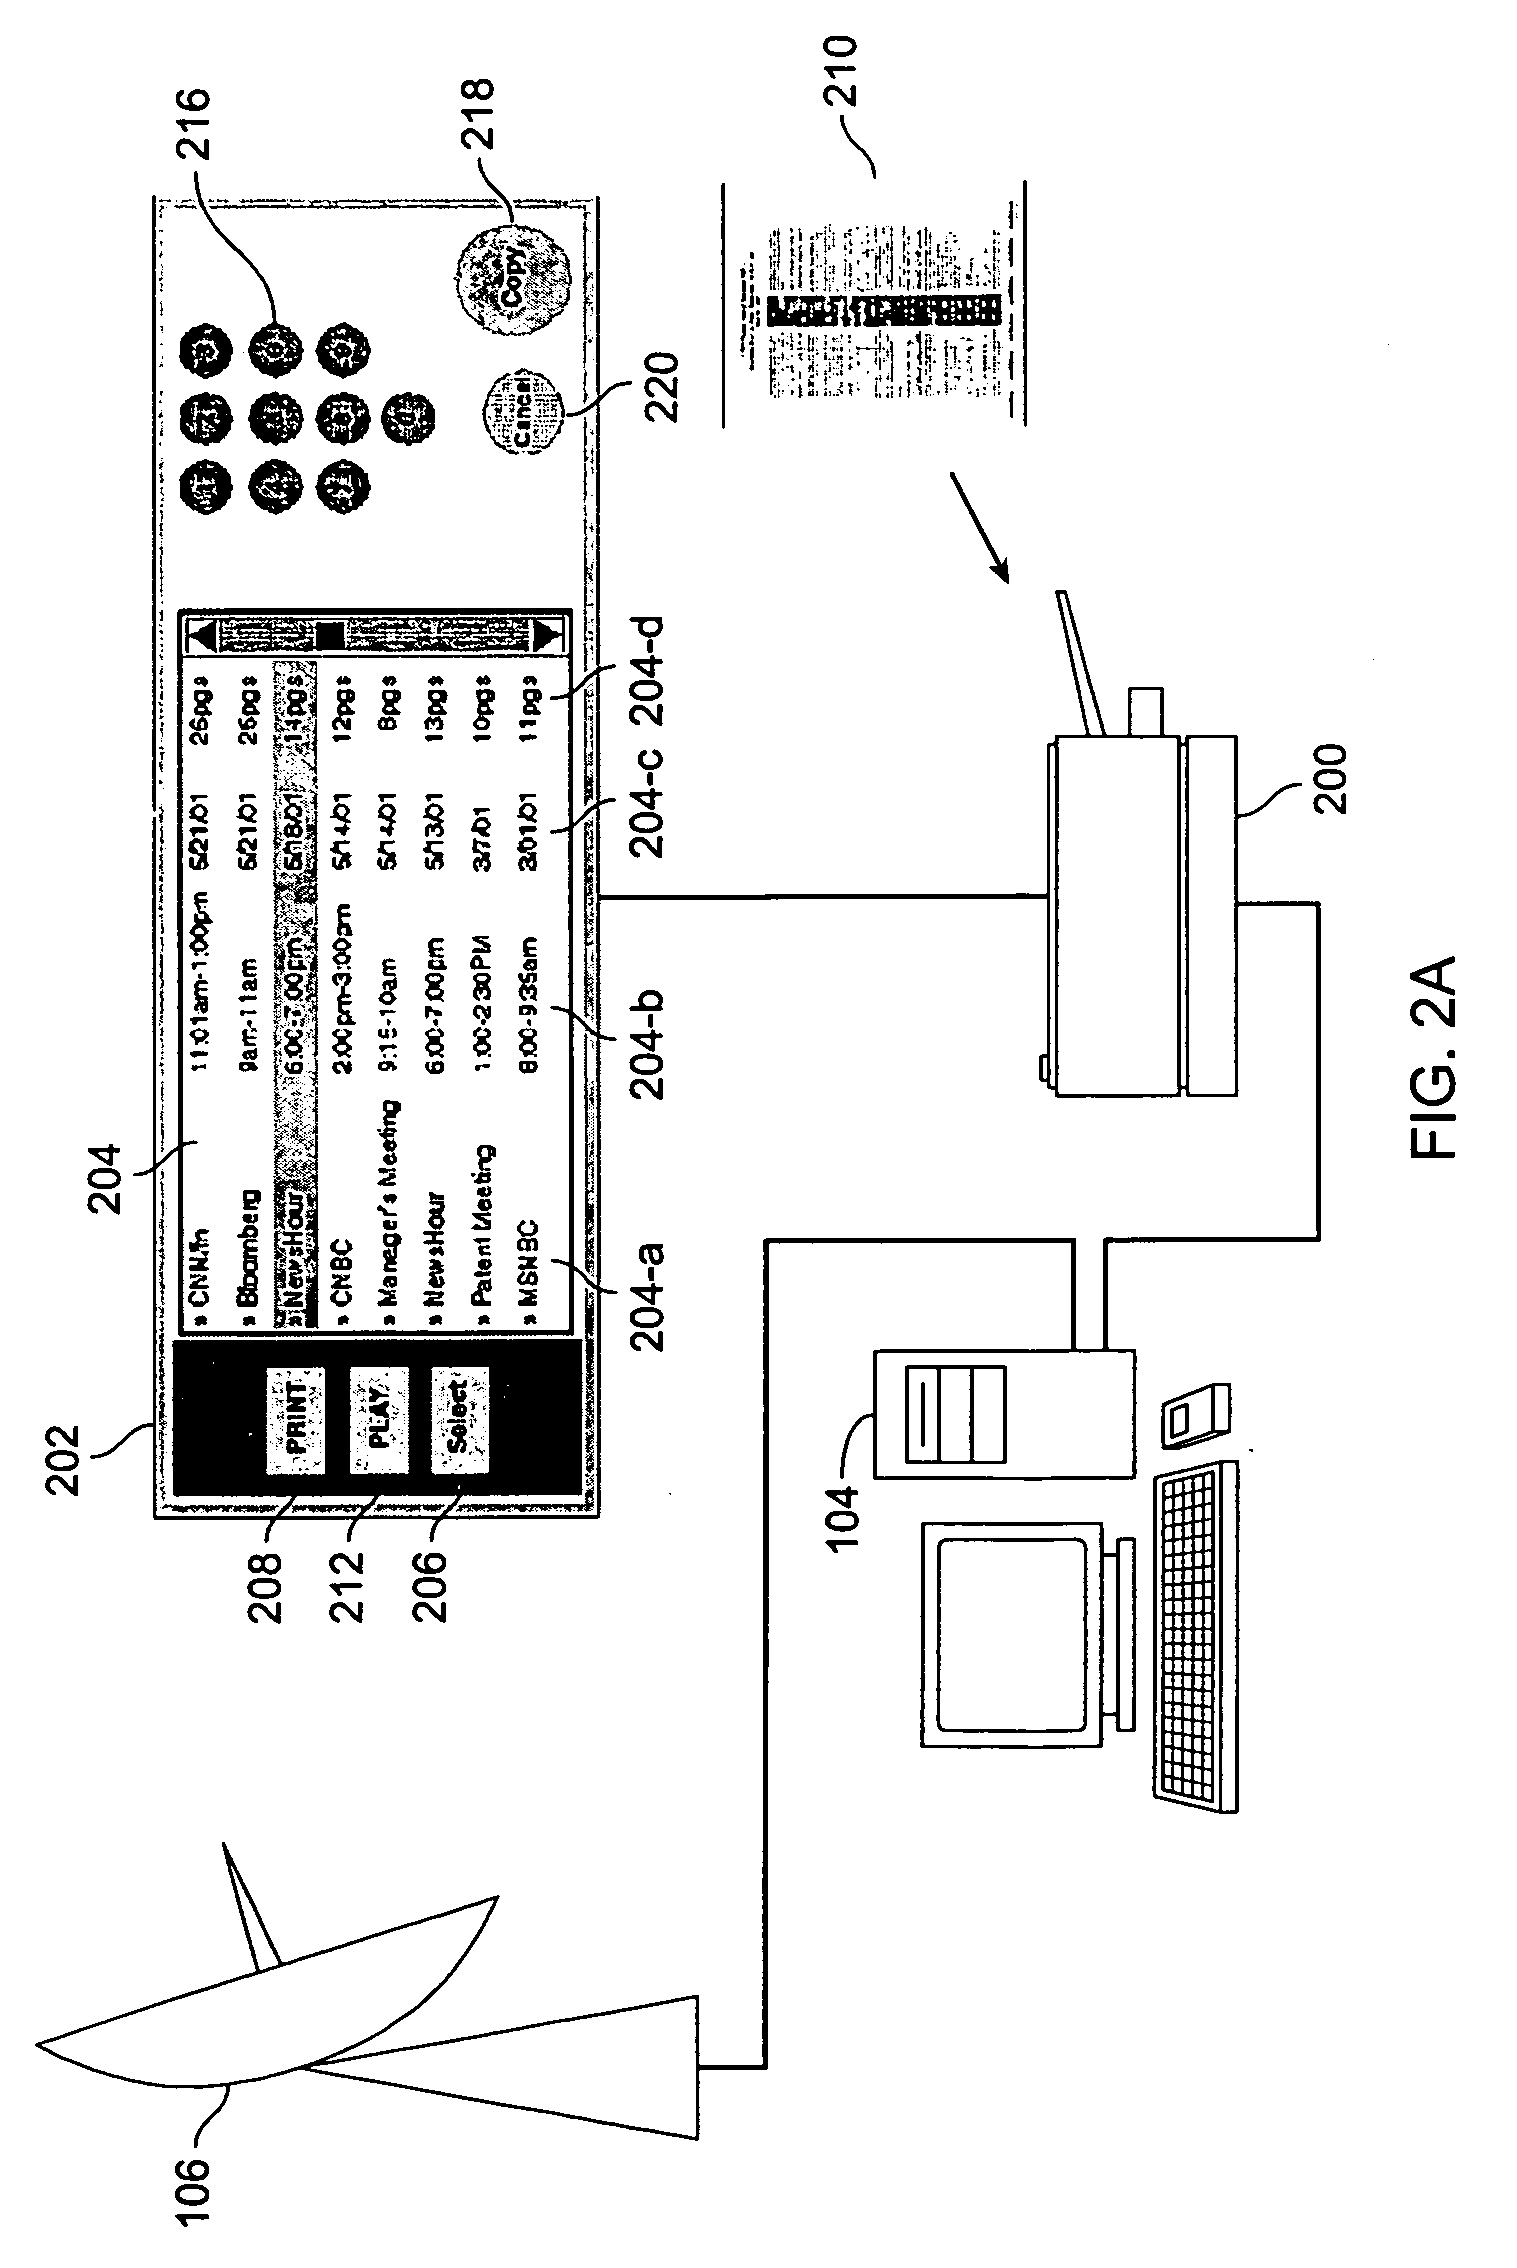 Paper-based interface for multimedia information stored by multiple multimedia documents